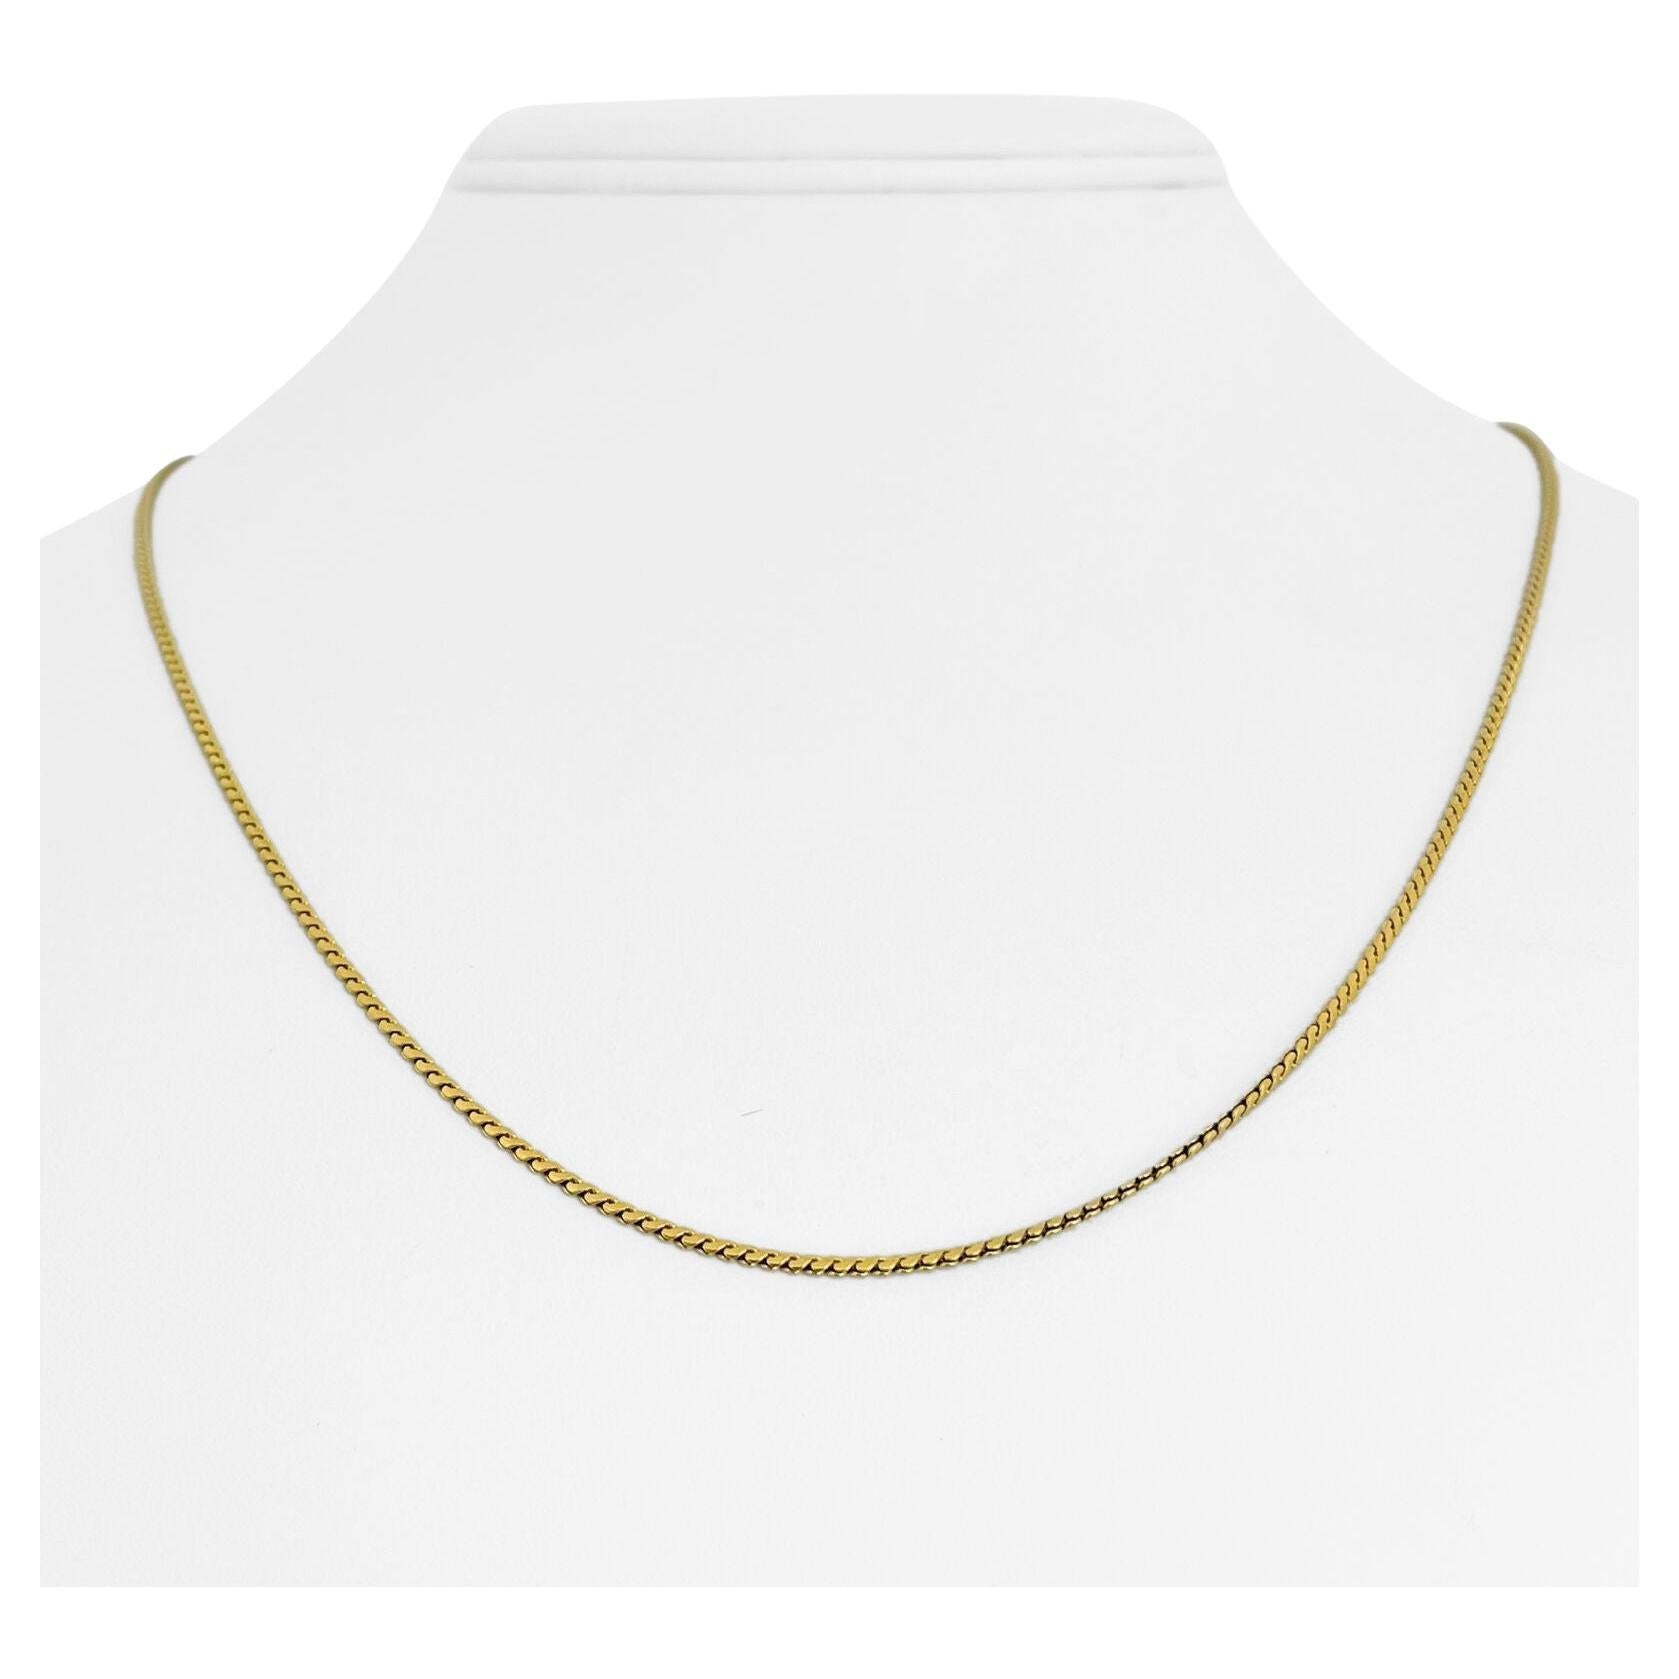 18 Karat Yellow Gold Solid Thin Serpentine Link Chain Necklace, Italy